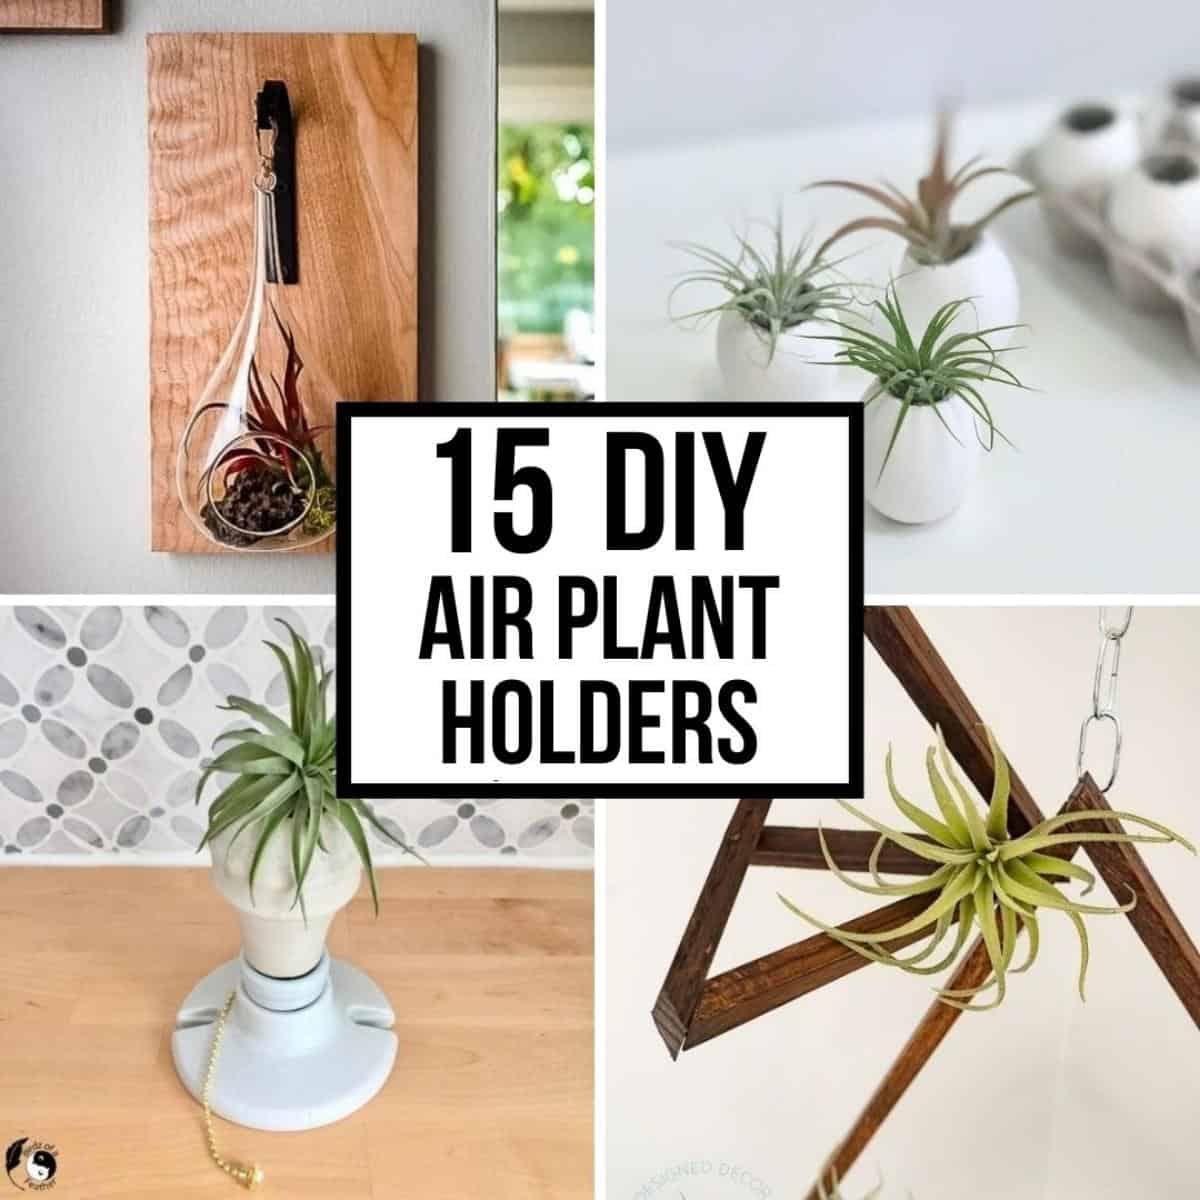 5 Ways to Display Your Air Plants  Air plants diy, Hanging air plants, Air  plants